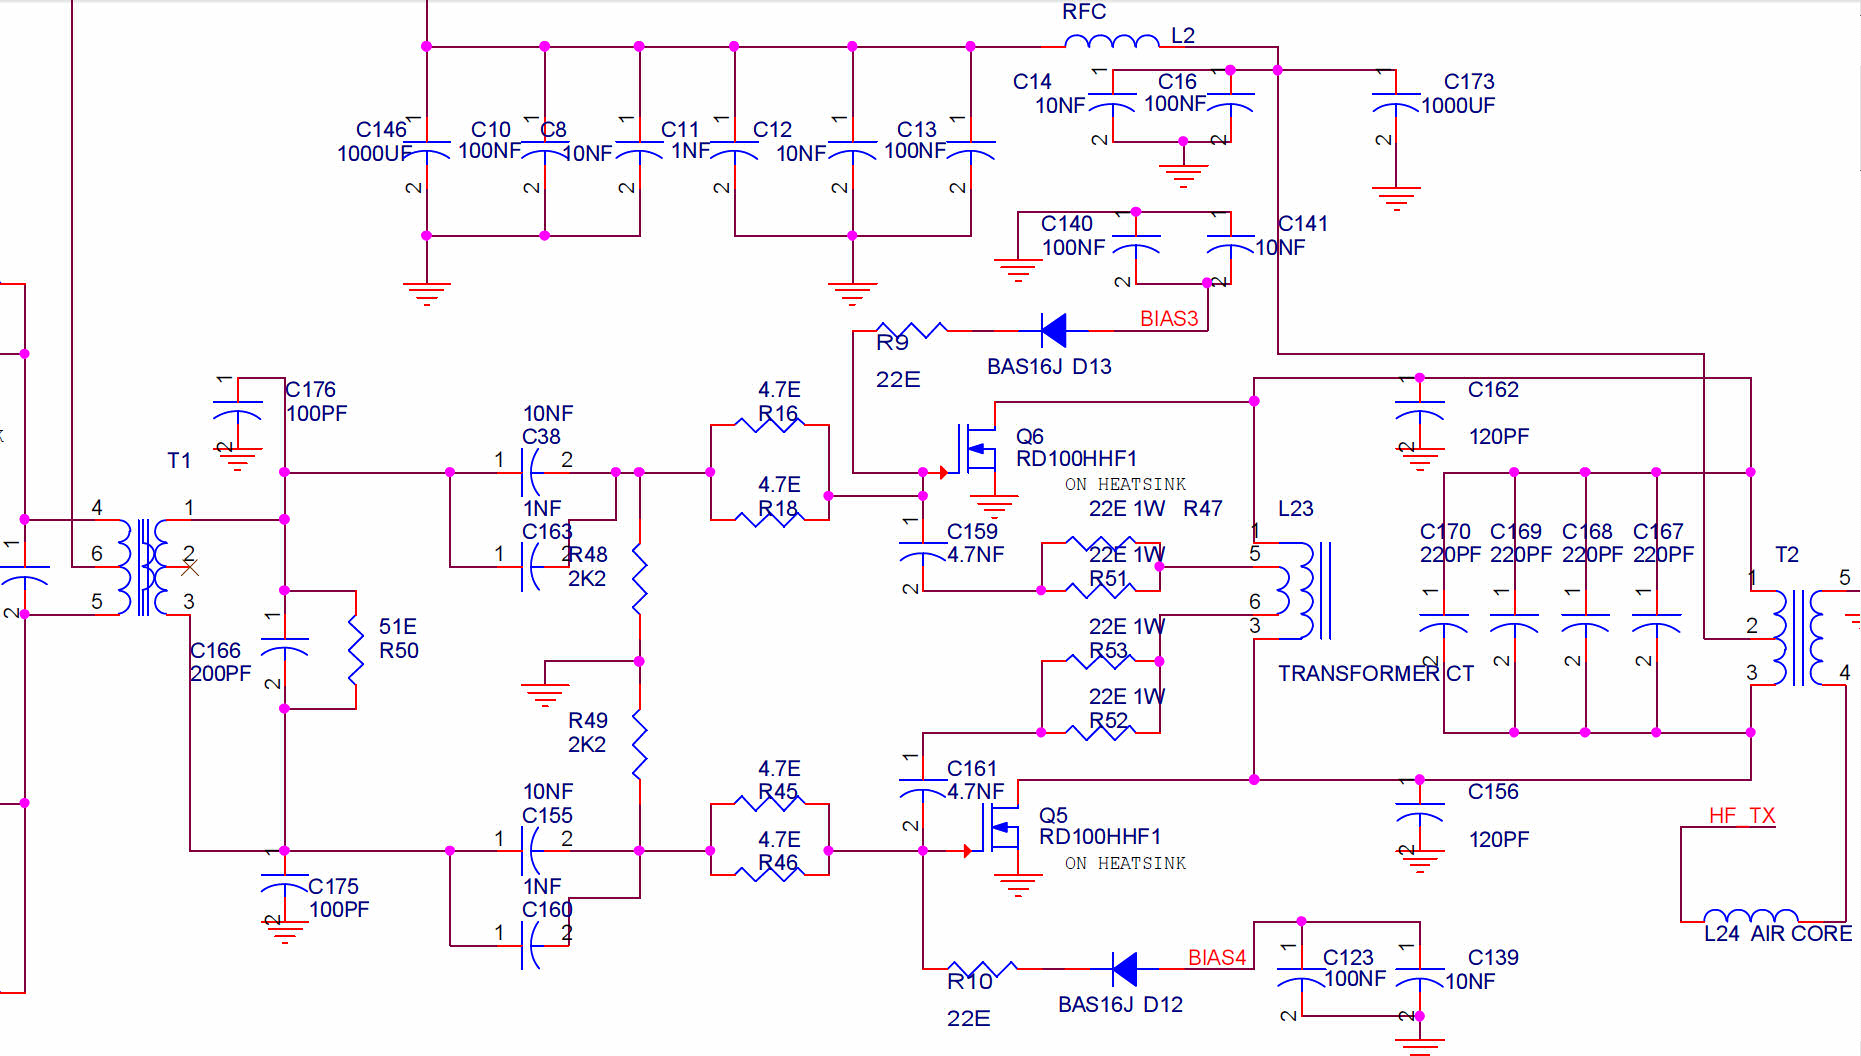 335163062-ANAN-200D-Filter-PA-board-revision-24-extract-of-circuit-diagram-showing-L23.jpg